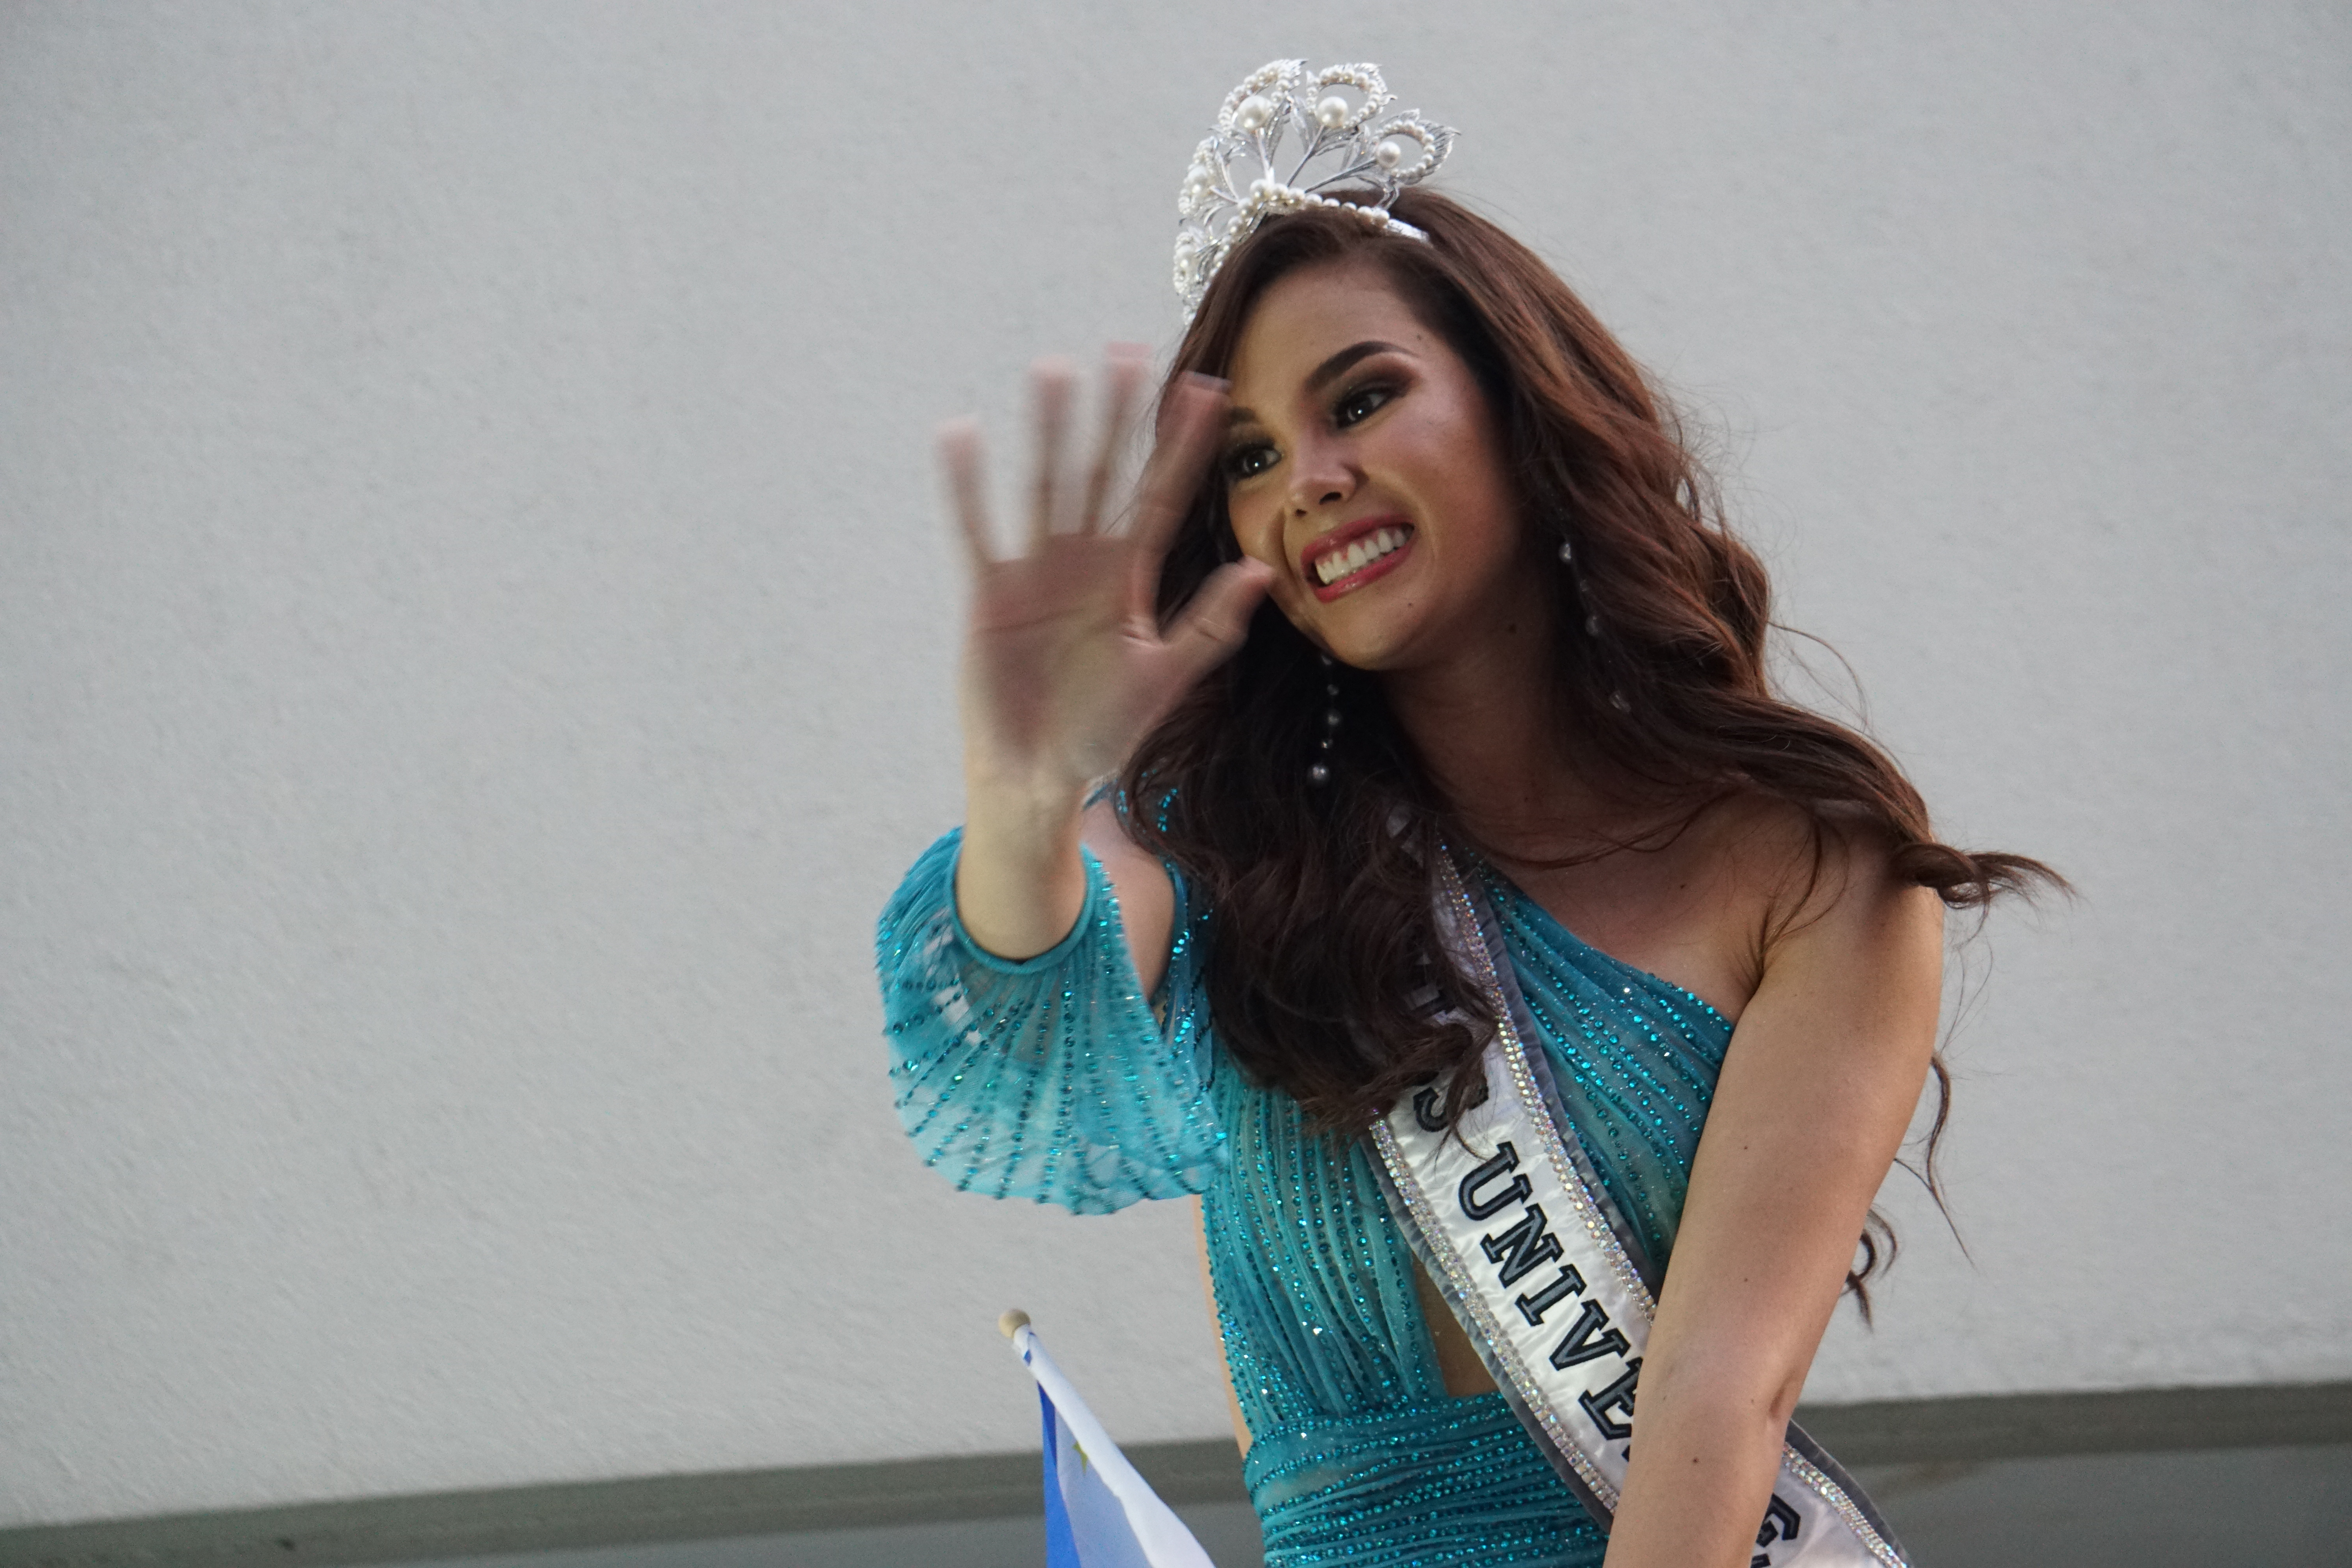 HAIL TO THE QUEEN. Catriona Gray waves to the crowd at the Araneta Center on Saturday, February 23 during her second homecoming parade. All photos by Dion Besa/Rappler 